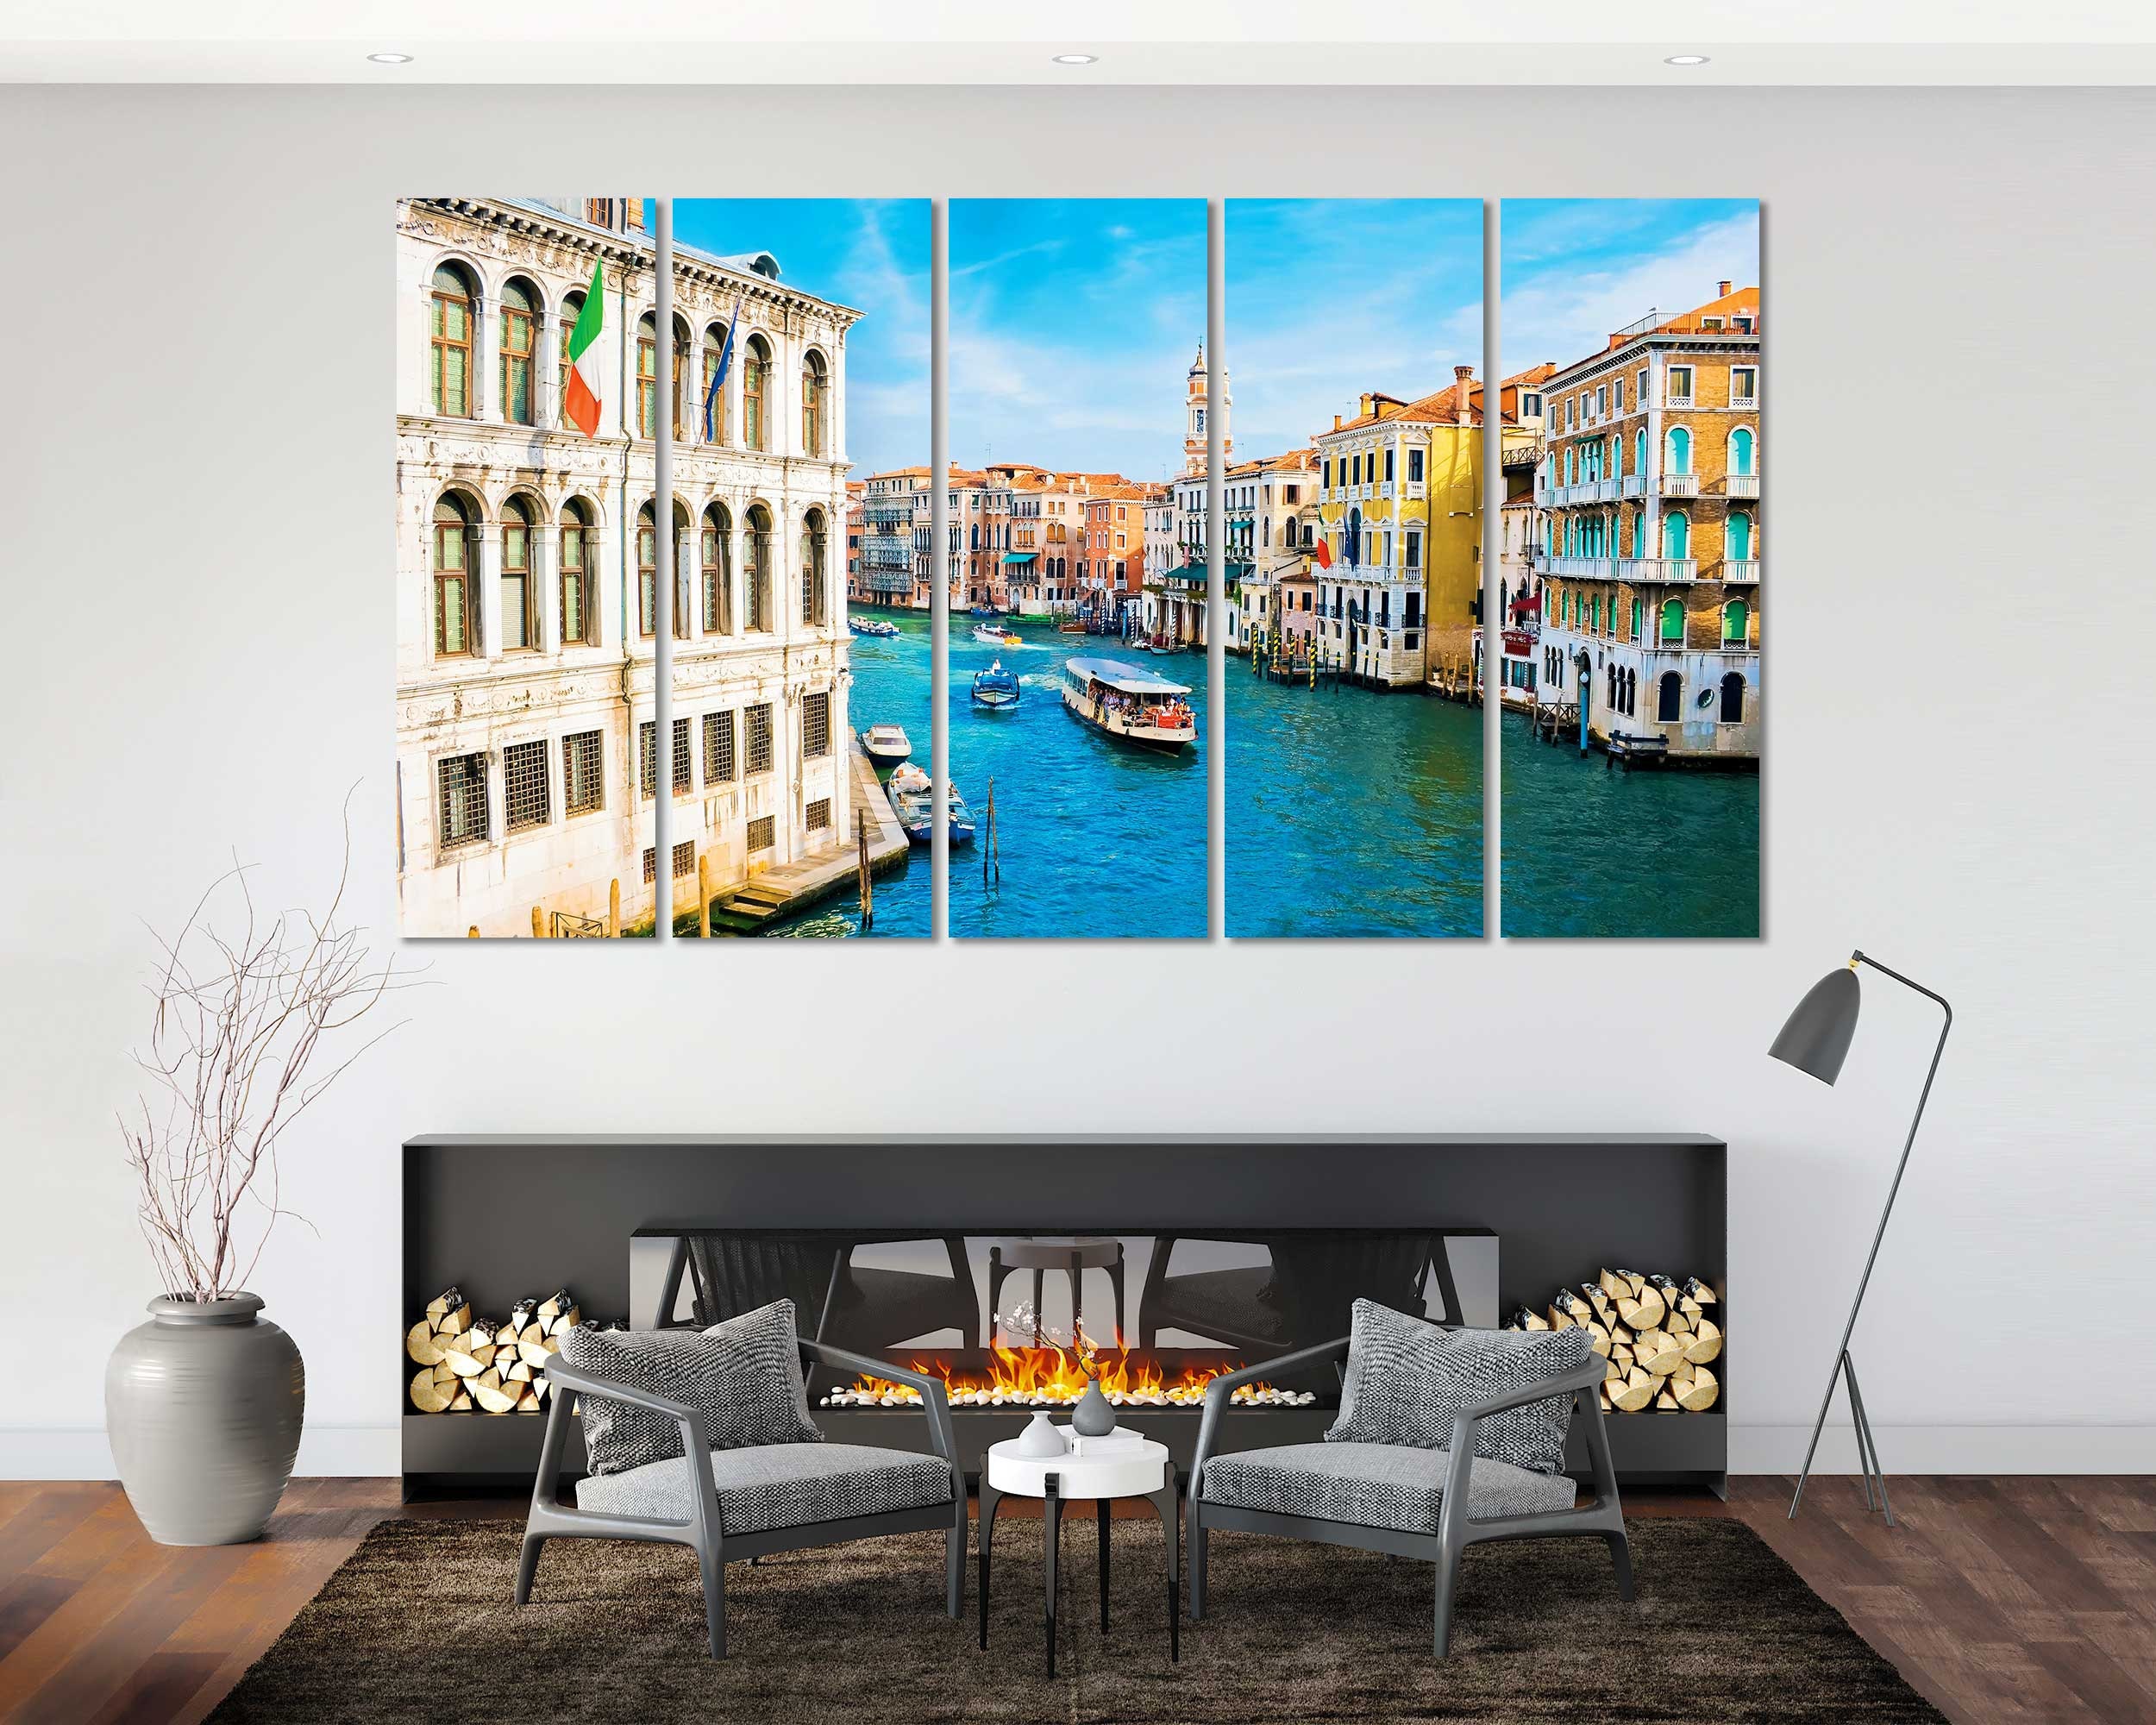 Venice Painting on Canvas 11x14 In, Original Venice Artwork, Venice Wall  Art, Old Town Italy Painting, Italy Artwork, Mother's Day Gift 